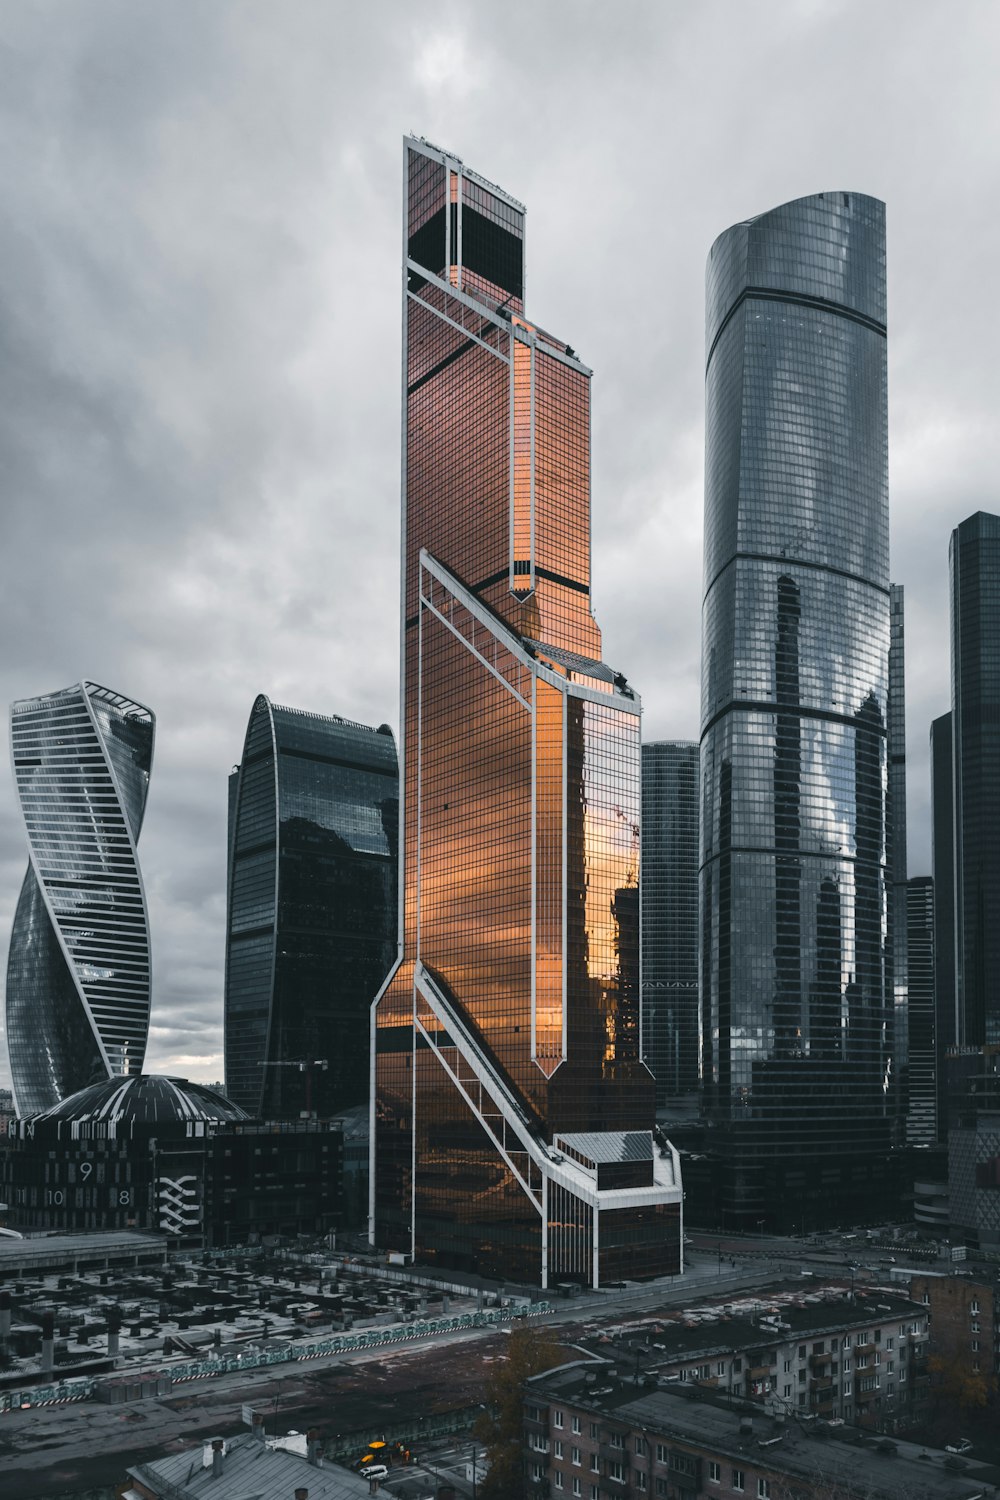 27+ Skyscraper Pictures | Download Free Images on Unsplash